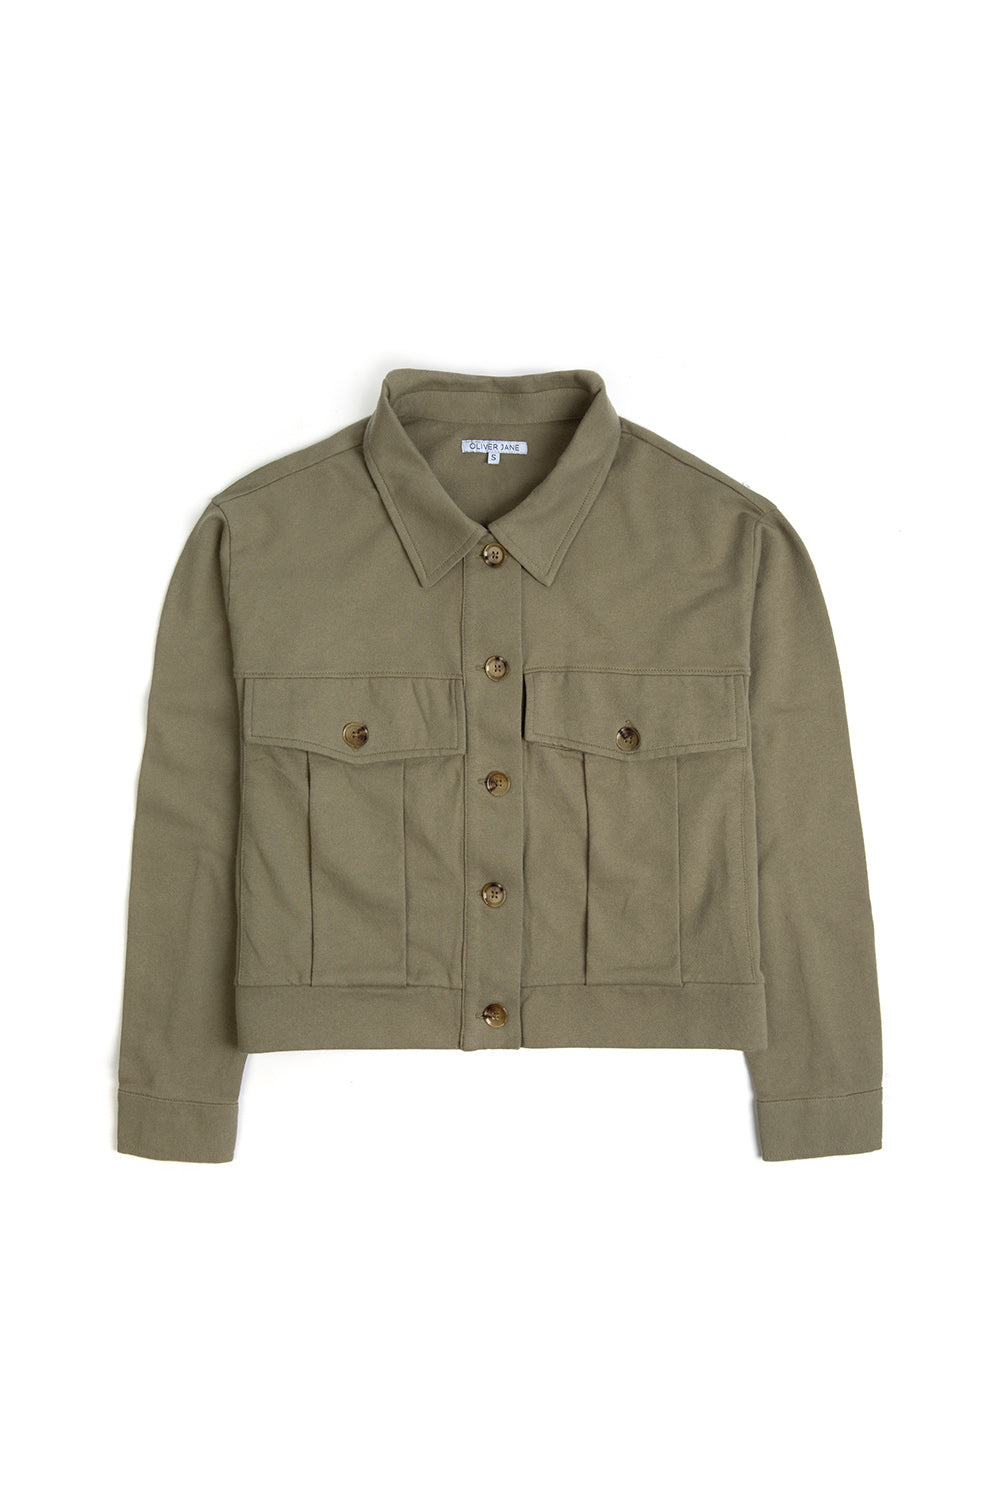 The Olive Bomber